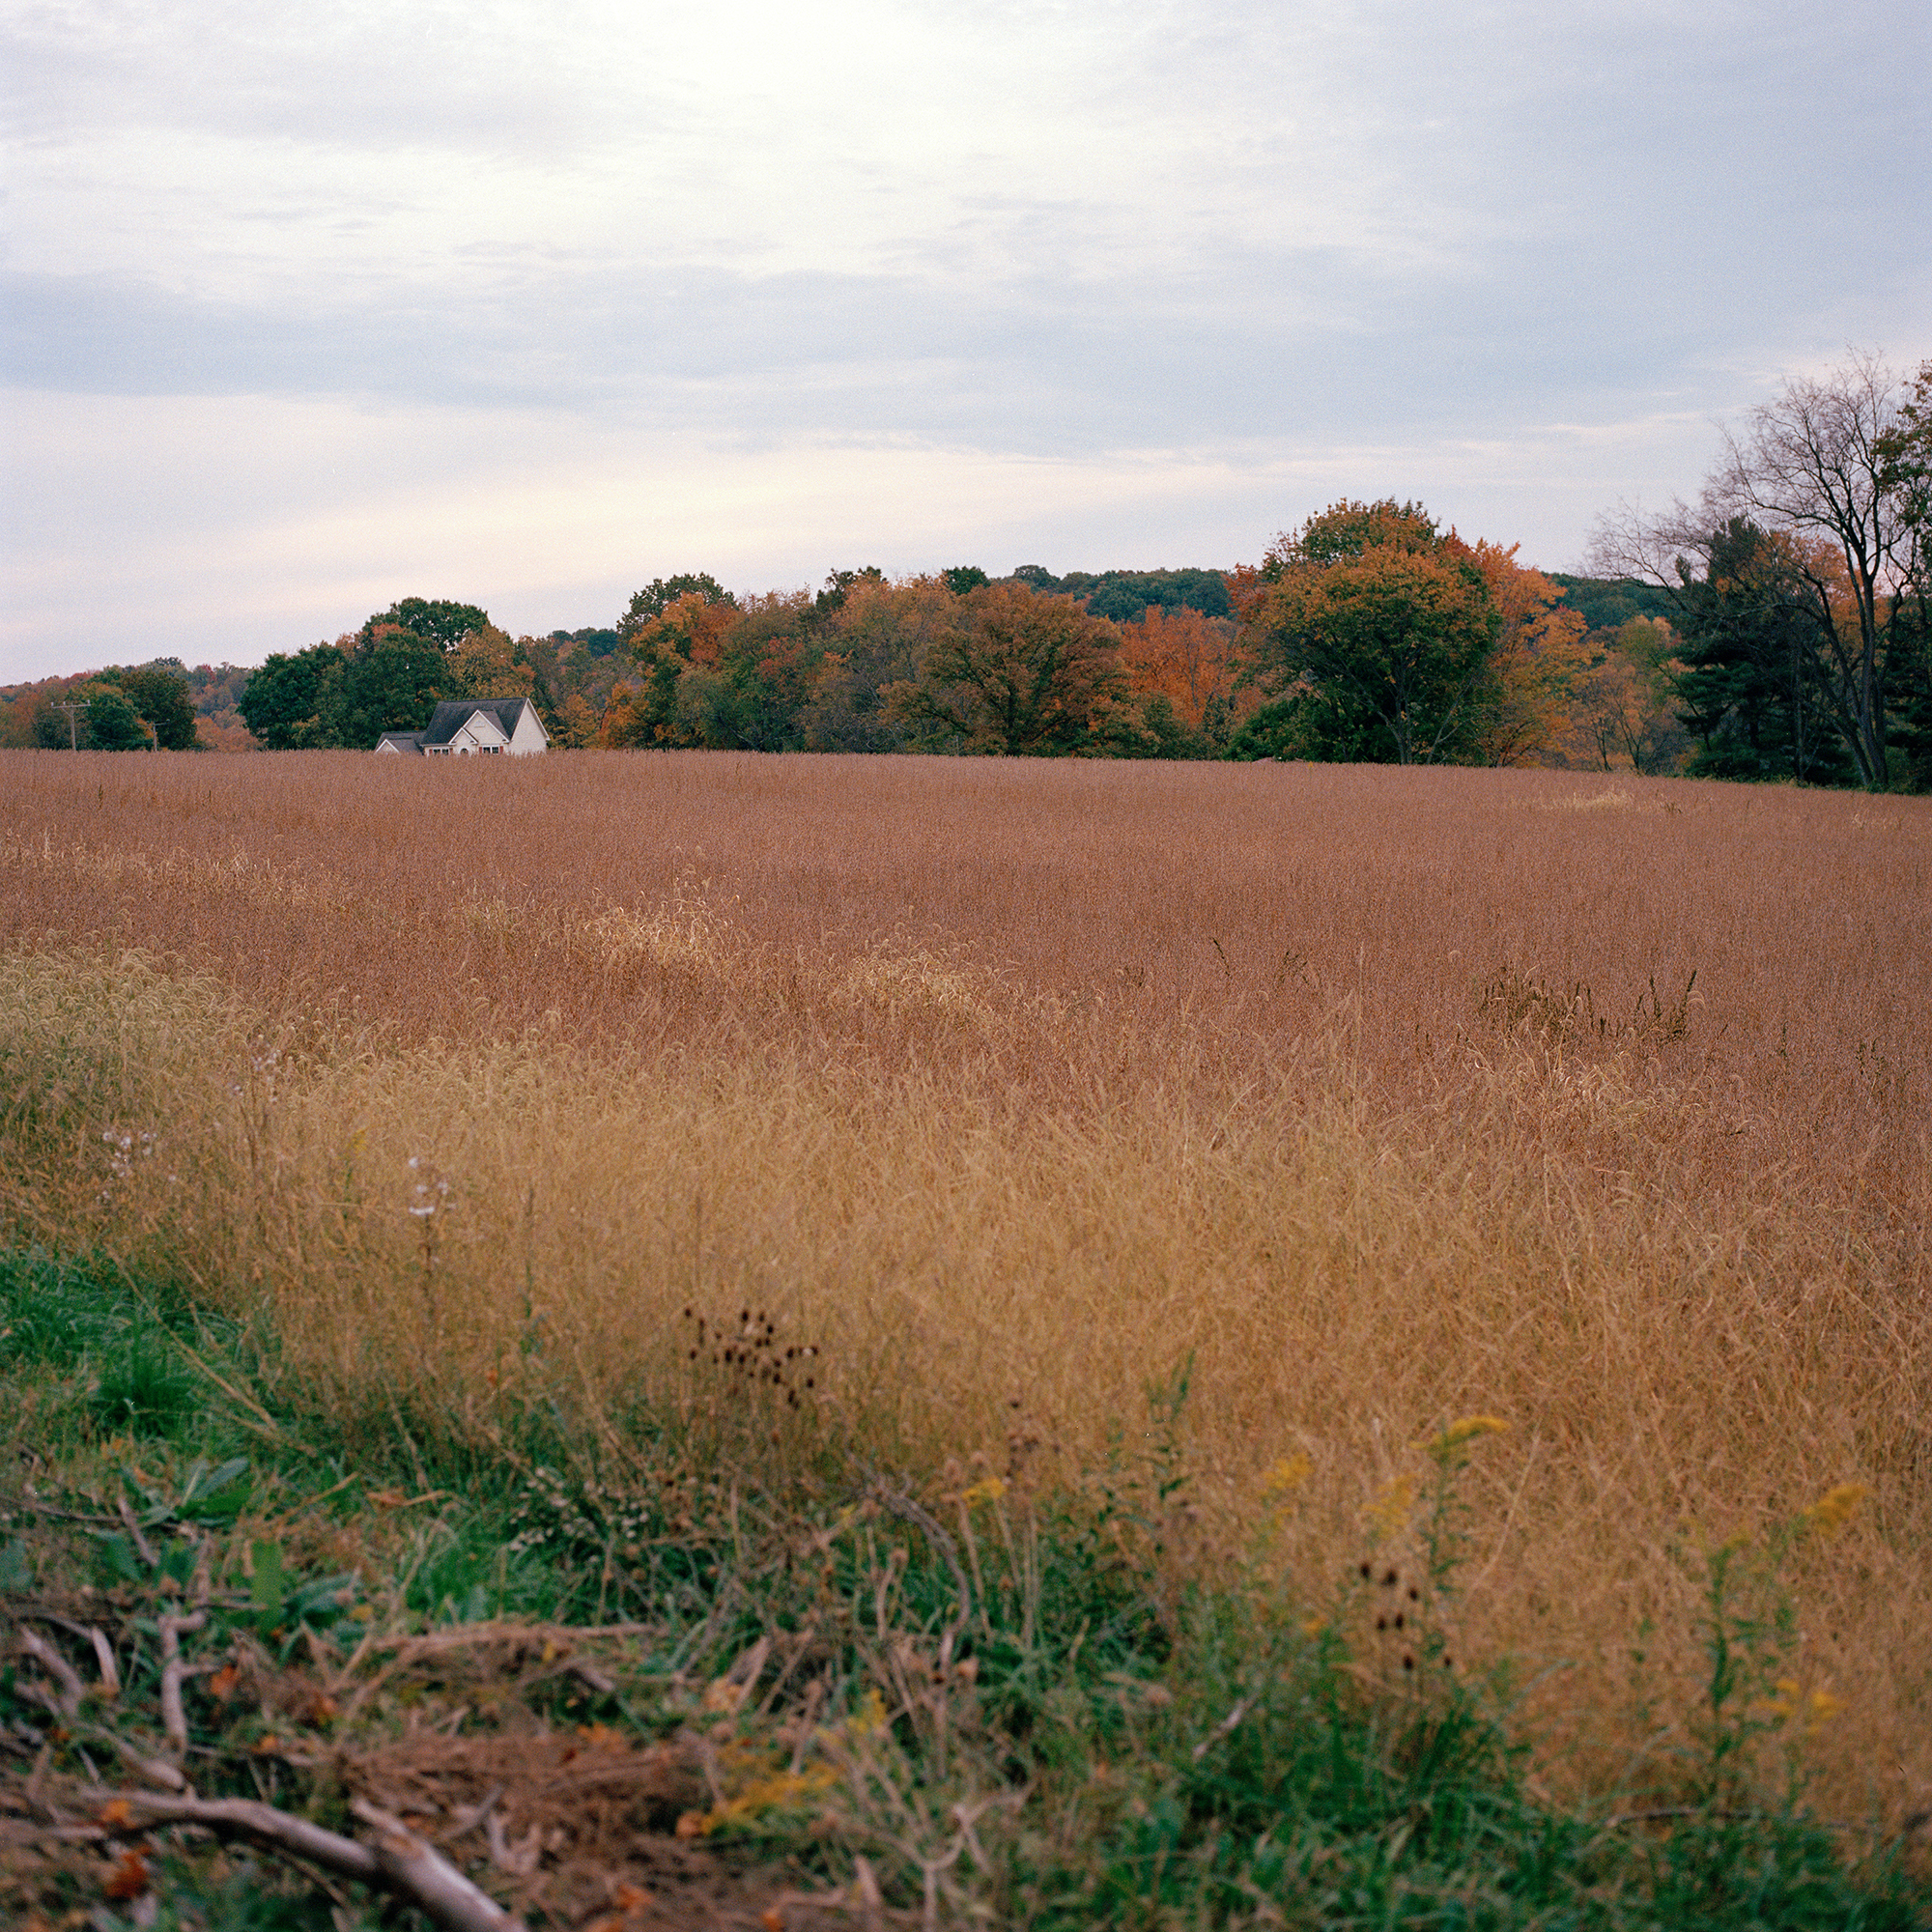 A home along the horizon of a field in fall